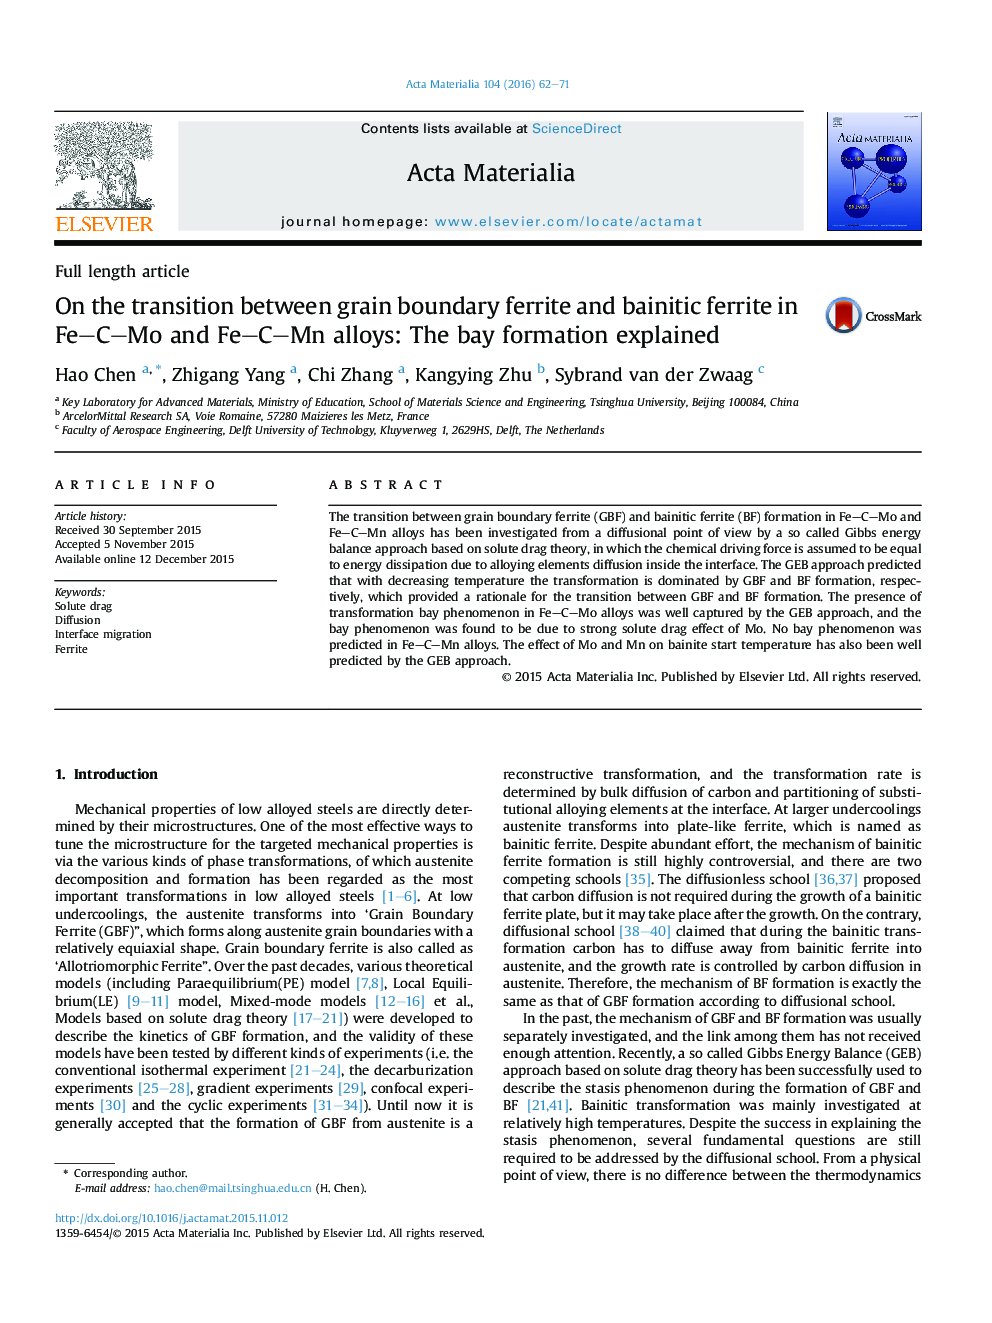 On the transition between grain boundary ferrite and bainitic ferrite in Fe–C–Mo and Fe–C–Mn alloys: The bay formation explained